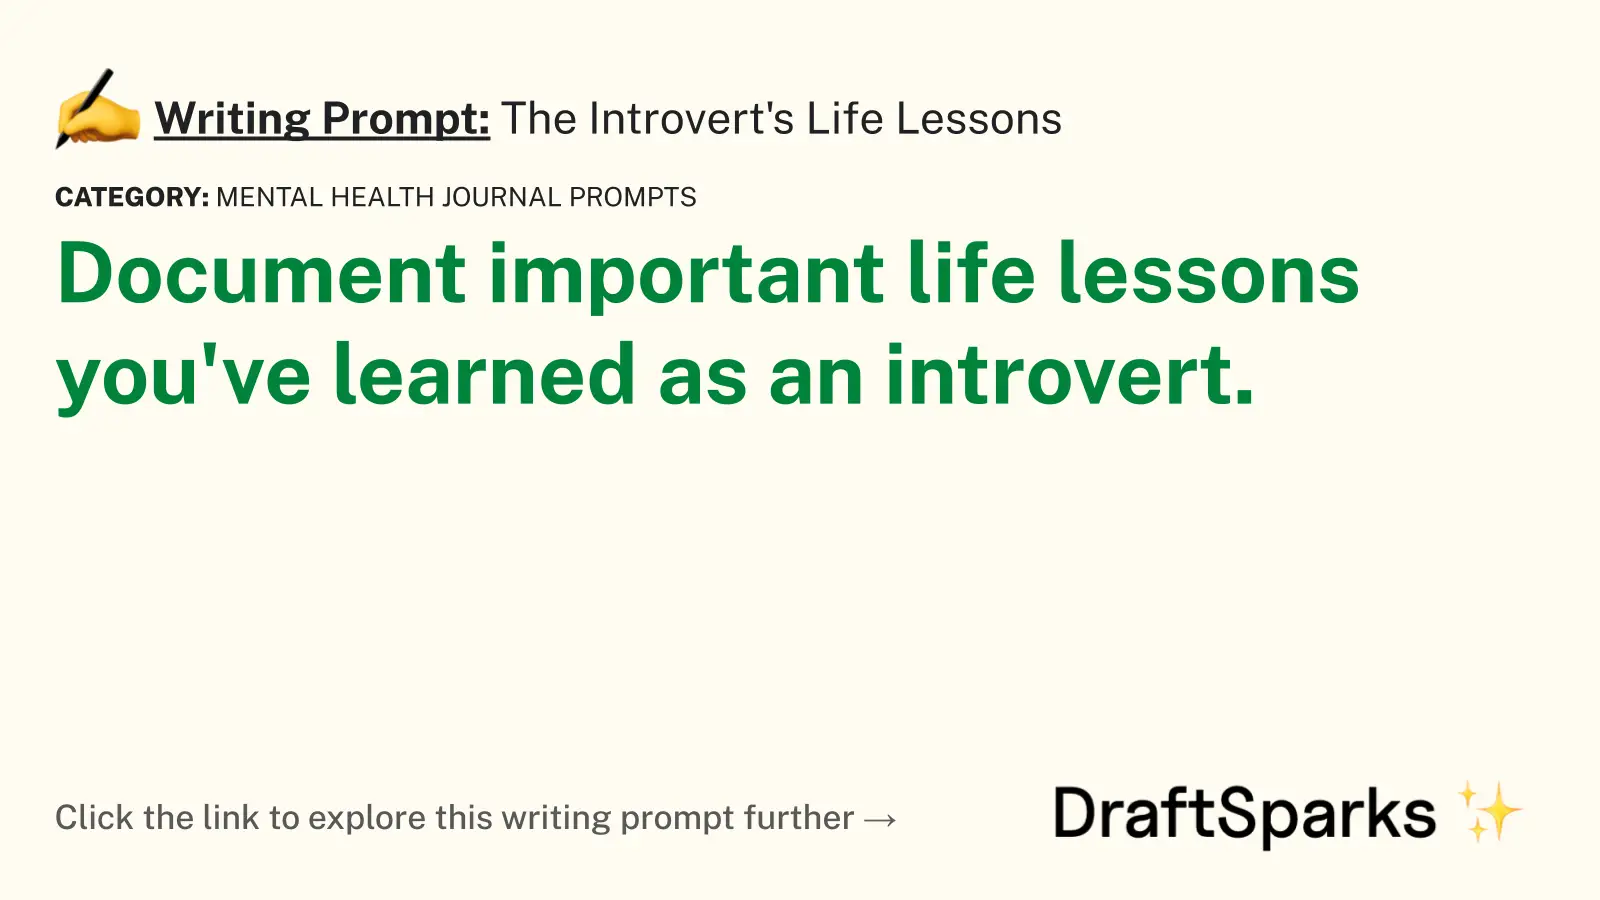 The Introvert’s Life Lessons